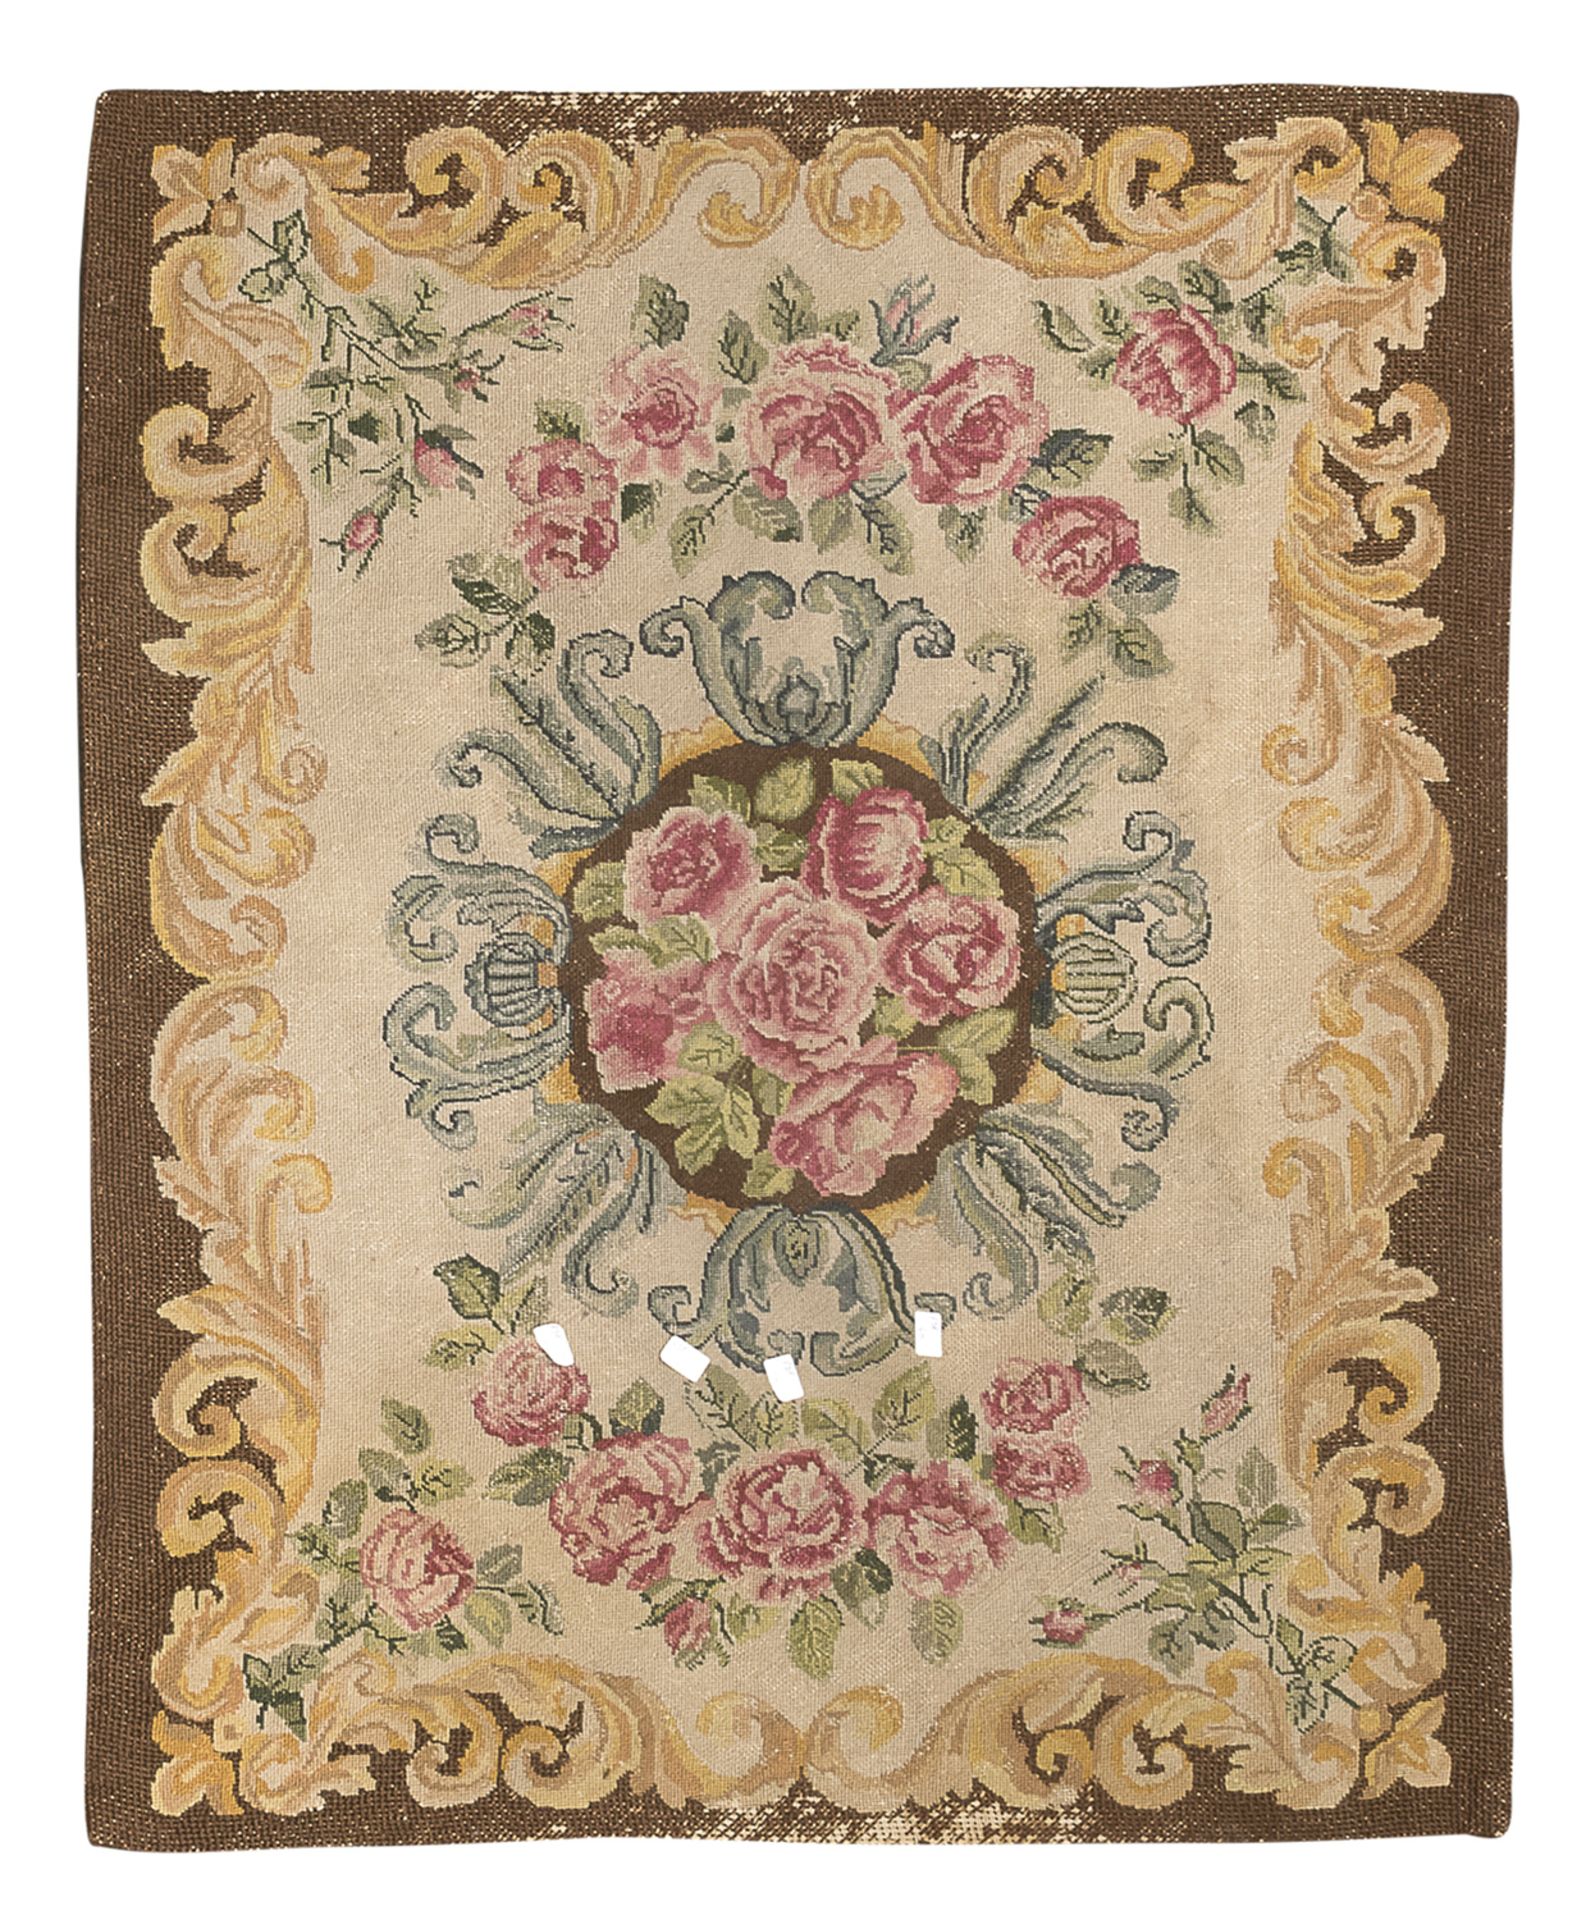 SMALL SAVONNERIE TAPESTRY